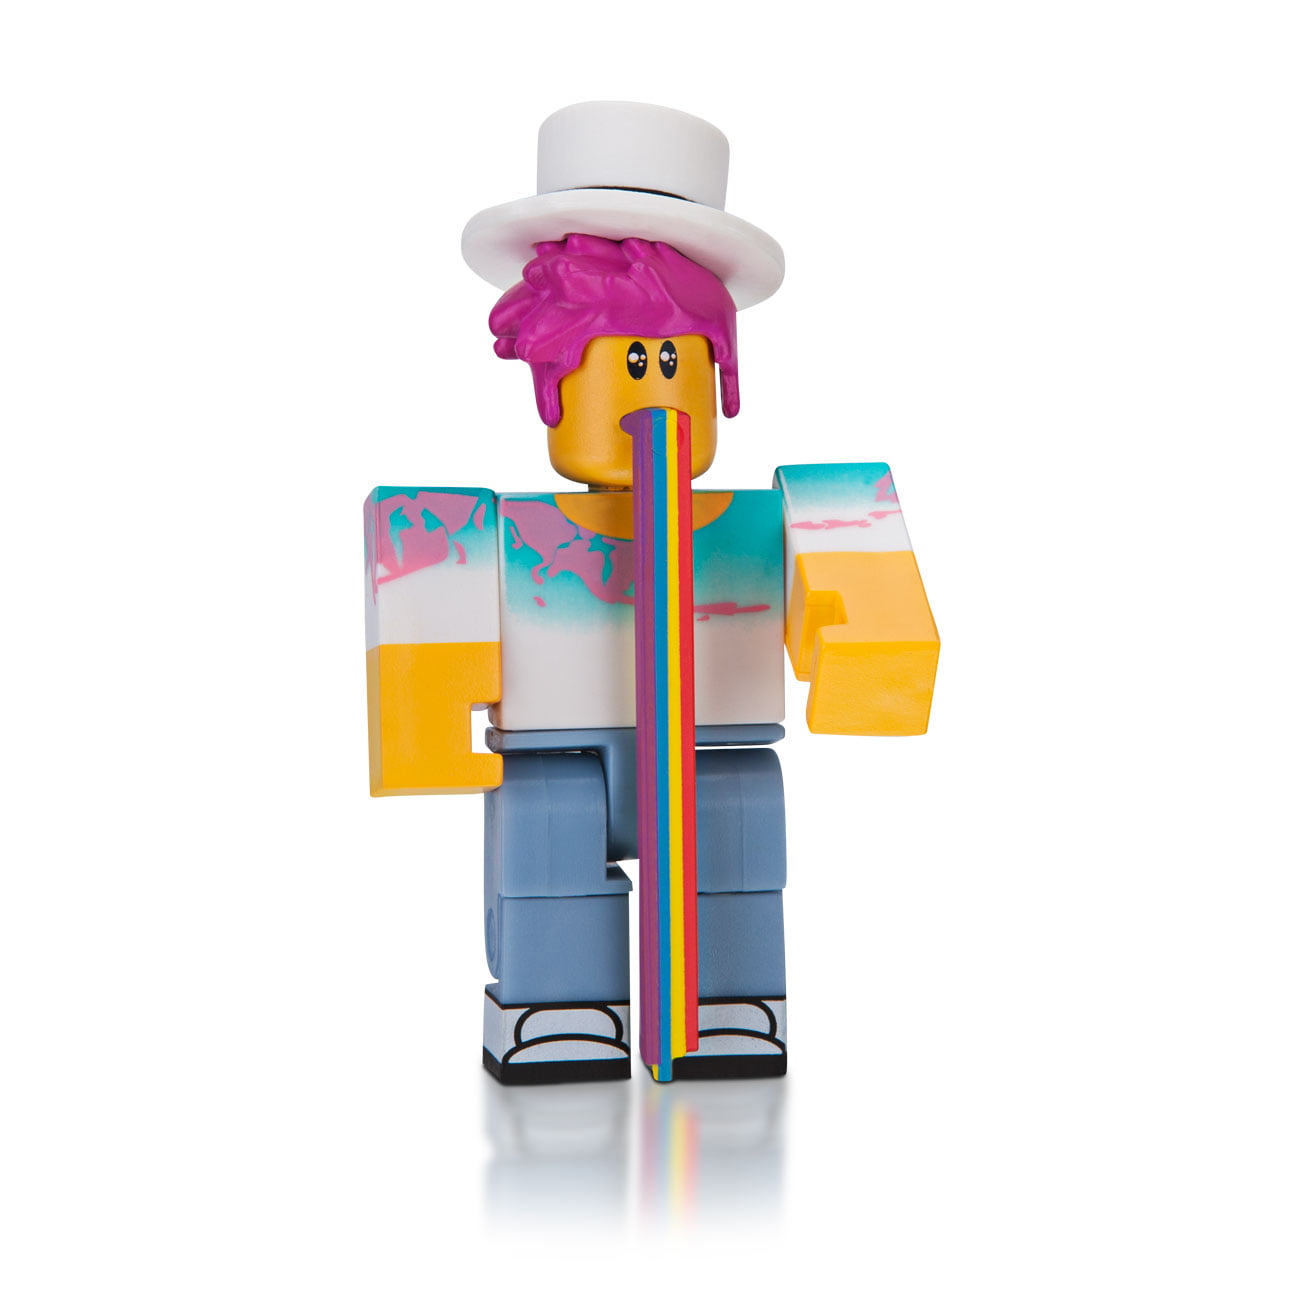 Roblox Celebrity Collection Series 2 Mystery Figure Includes 1 Figure Exclusive Virtual Item Walmart Com Walmart Com - amazon com roblox series 2 roblox celebrity collection 24 piece set toys games